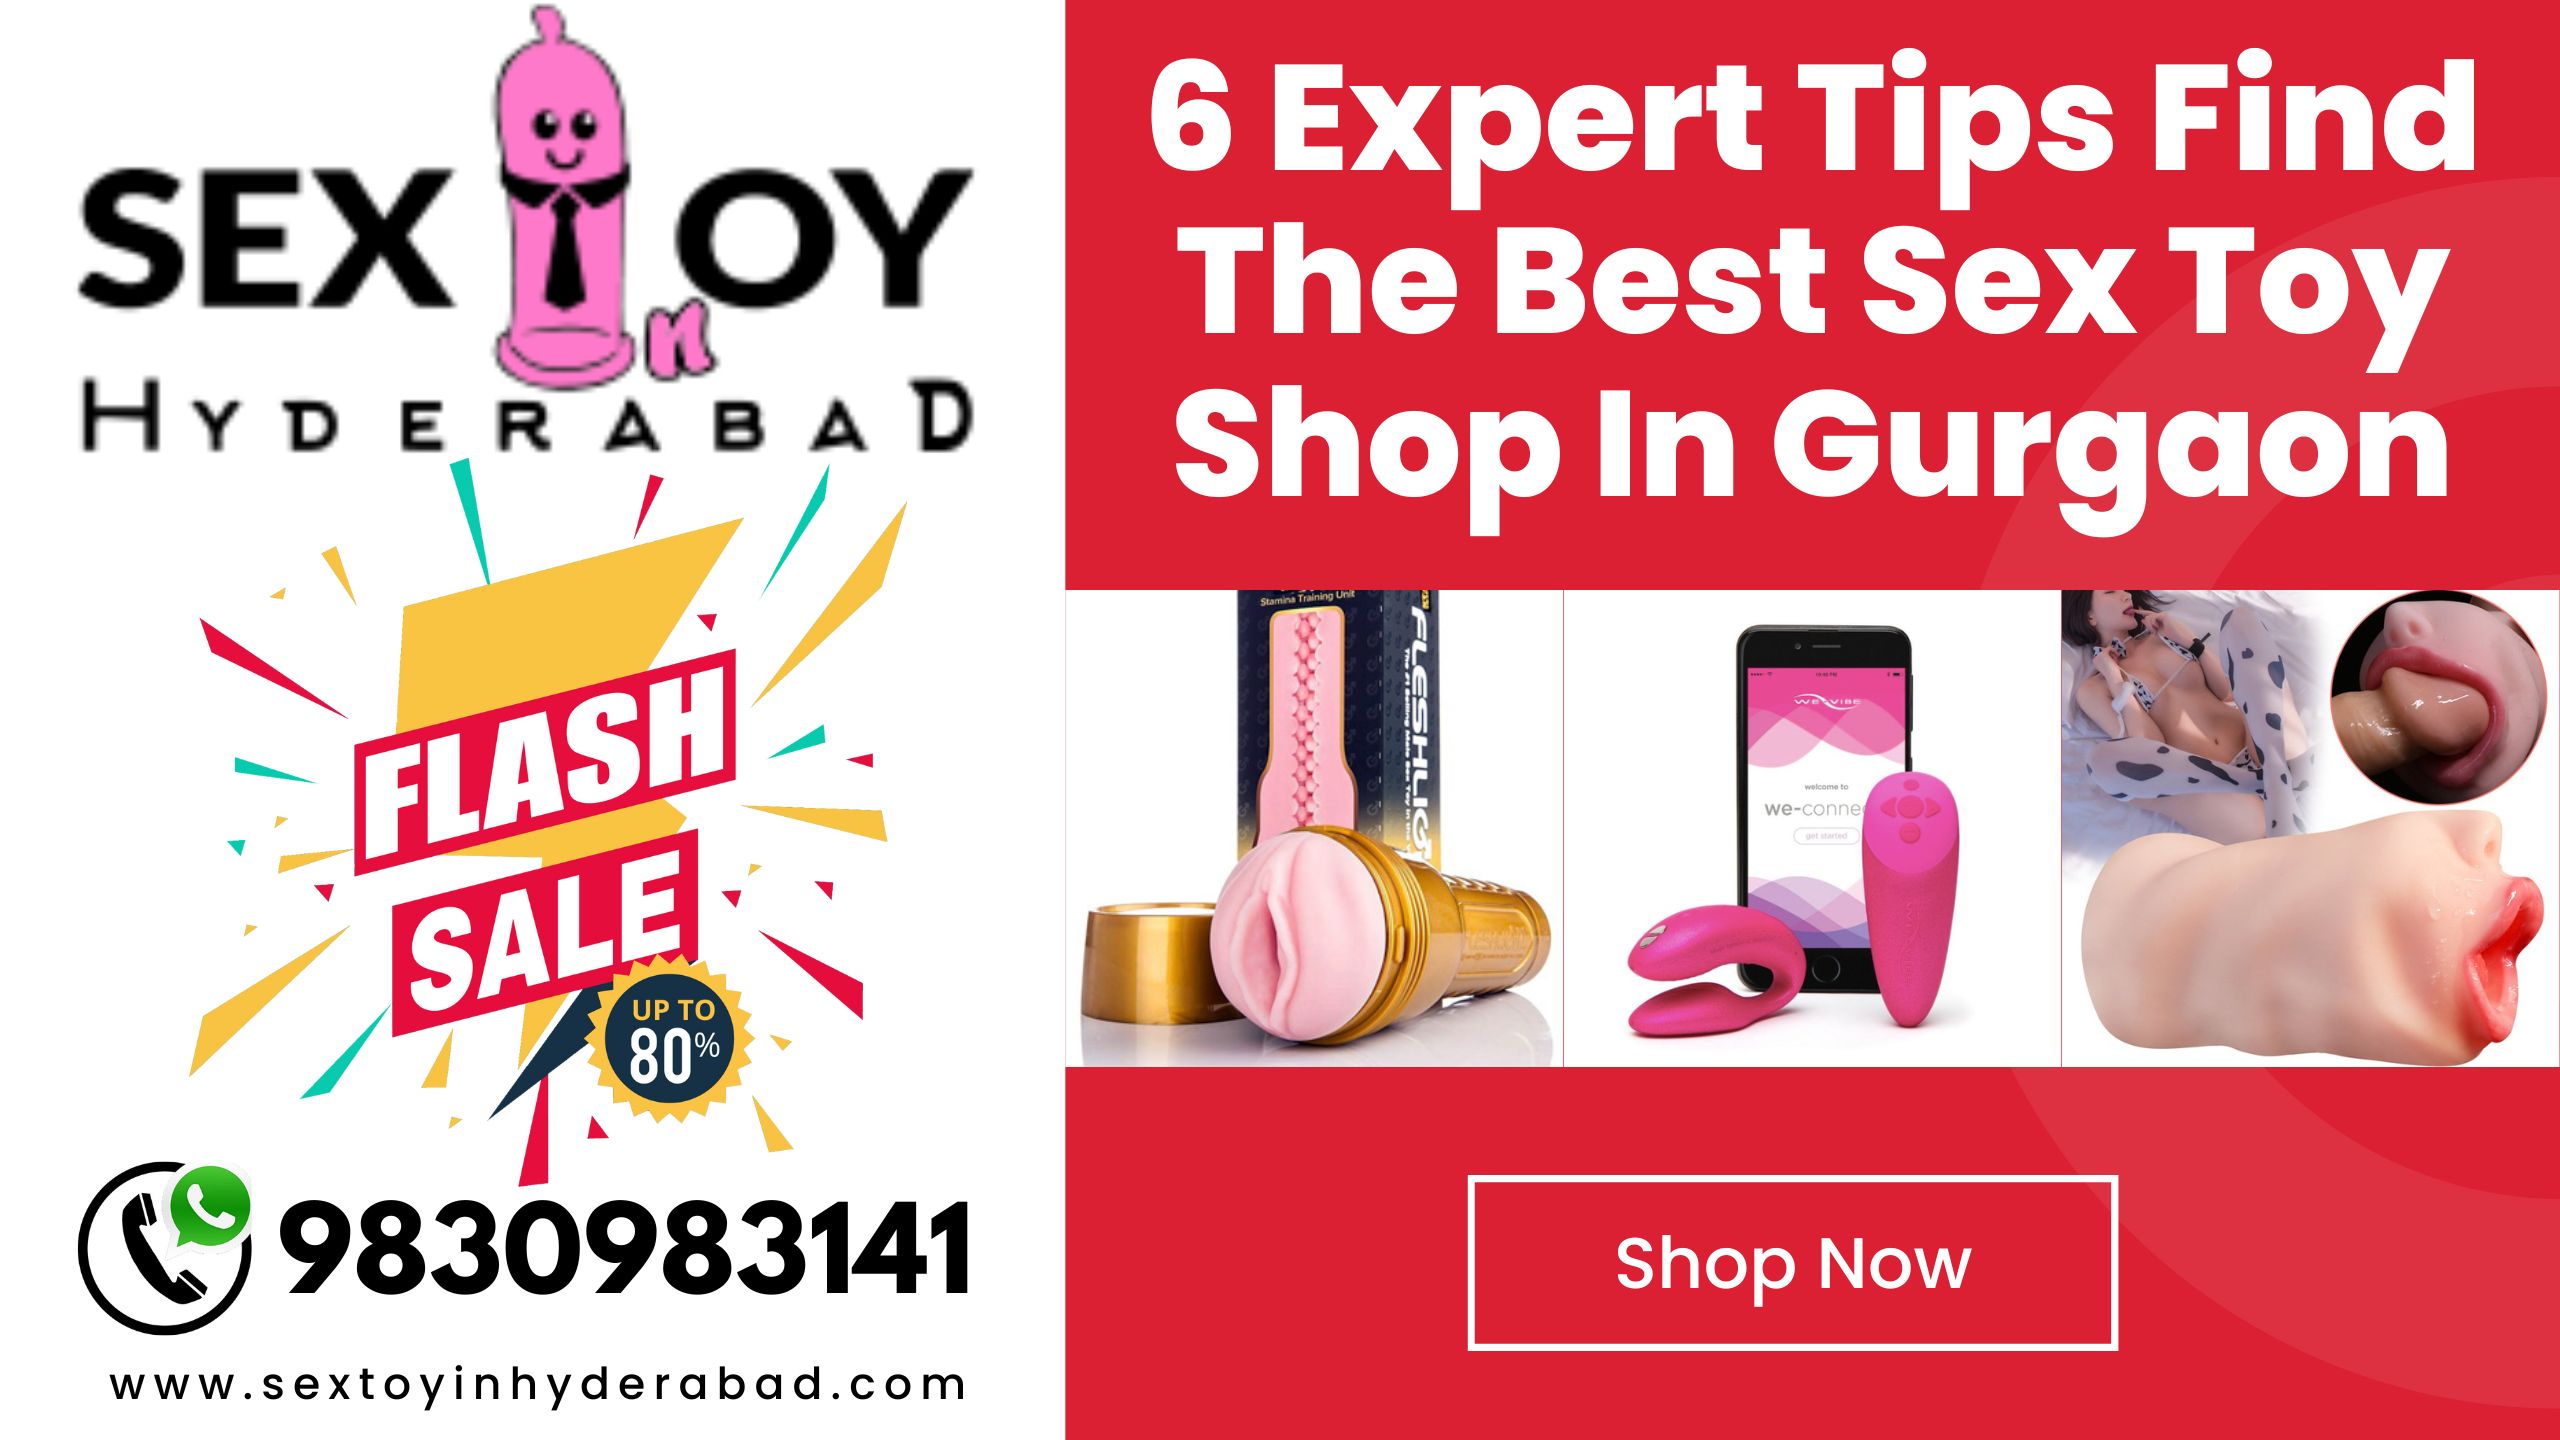 6-expert-tips-to-find-best-sex-toy-shop-in-gurgaon